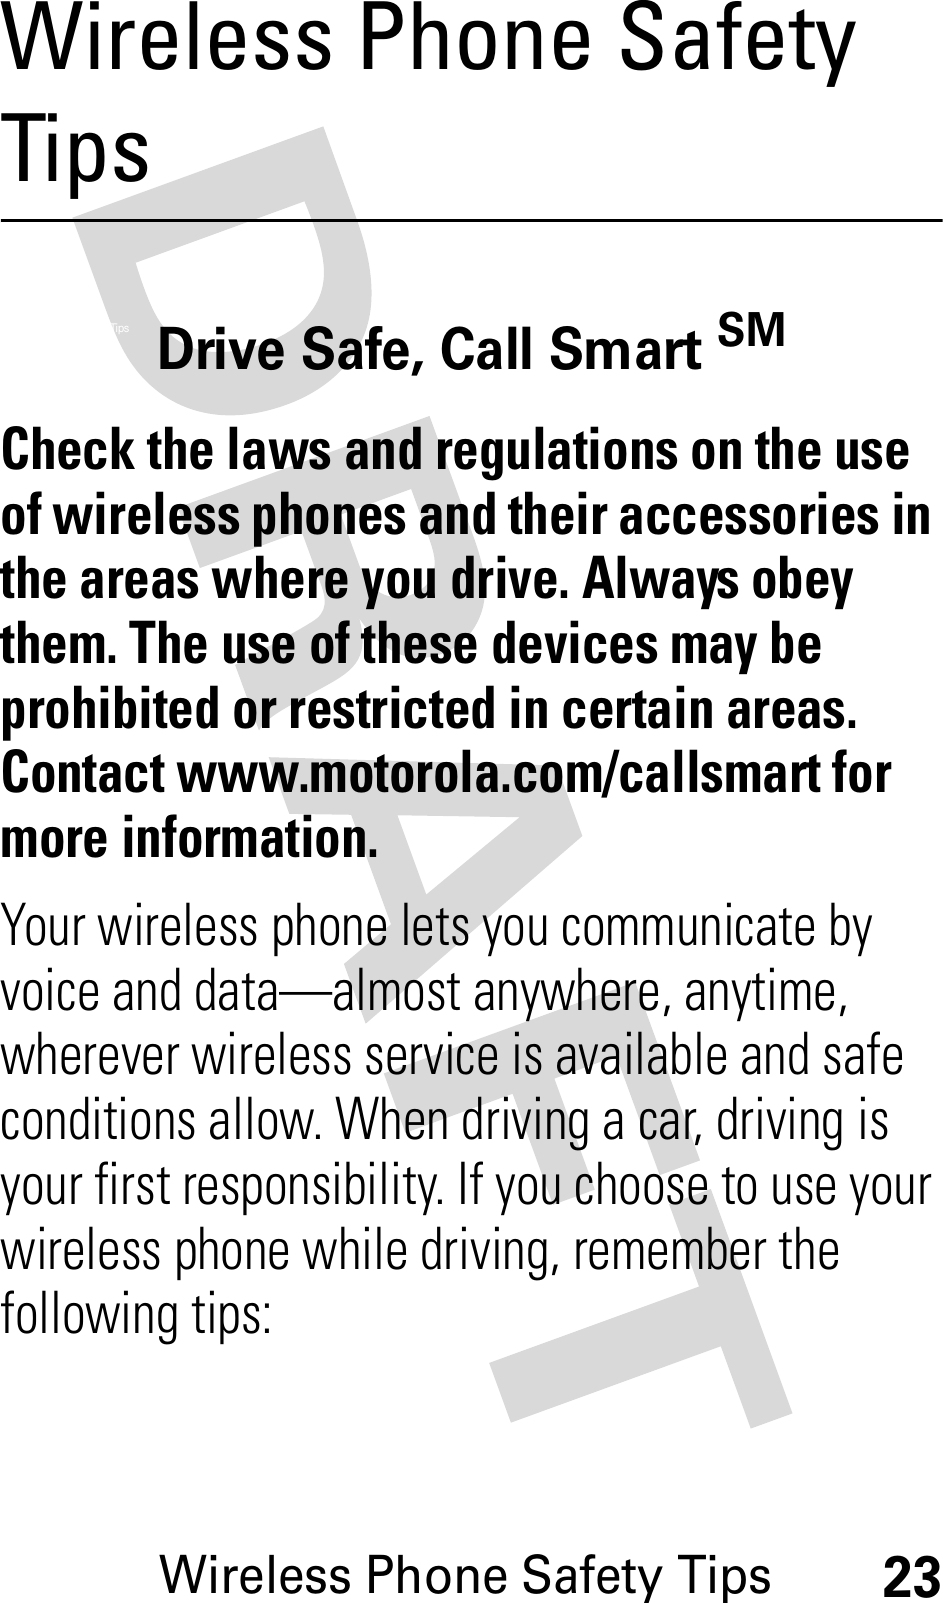 Wireless Phone Safety Tips23Wireless Phone Safety TipsWireless Phone Safety TipsDrive Safe, Call Smart SMCheck the laws and regulations on the use of wireless phones and their accessories in the areas where you drive. Always obey them. The use of these devices may be prohibited or restricted in certain areas. Contact www.motorola.com/callsmart for more information.Your wireless phone lets you communicate by voice and data—almost anywhere, anytime, wherever wireless service is available and safe conditions allow. When driving a car, driving is your first responsibility. If you choose to use your wireless phone while driving, remember the following tips: